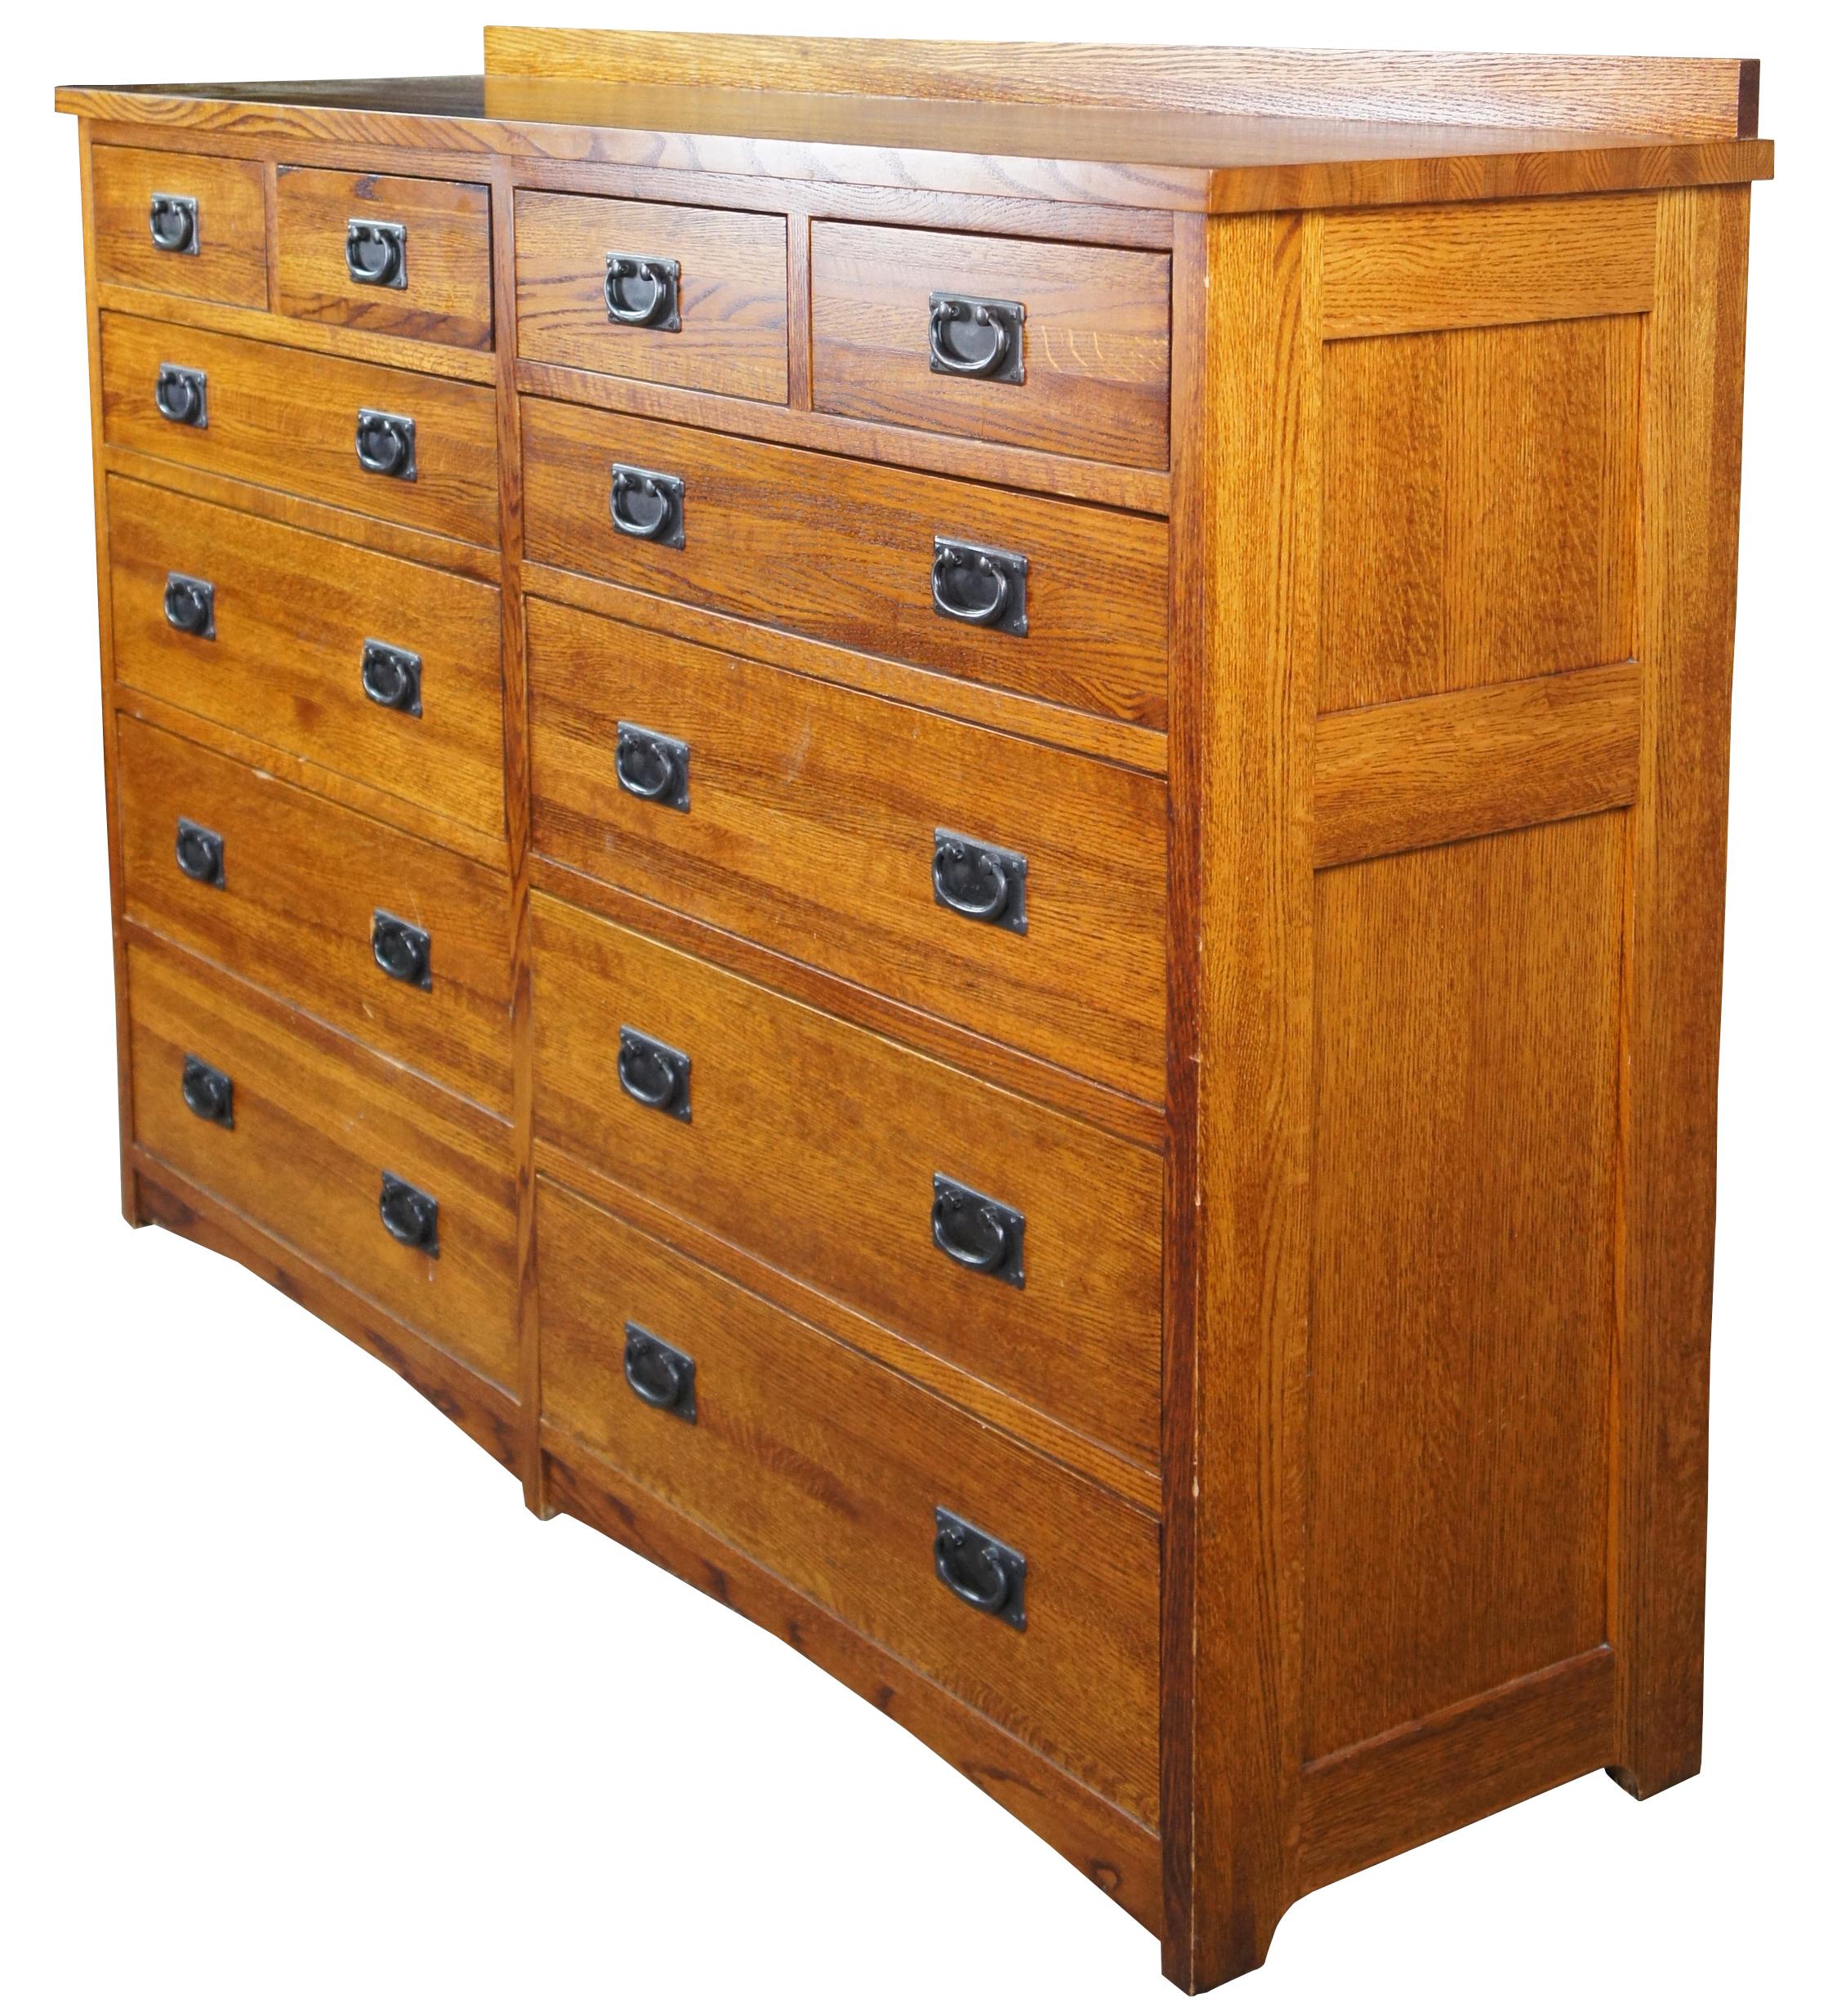 Vintage American made Amish mule style chest or double dresser. Made of quartersawn oak featuring mission styling with twelve drawers, paneled sides, and iron hardware. Michaels / Bungalow / Trend Manor #3108

Measures: 65.5